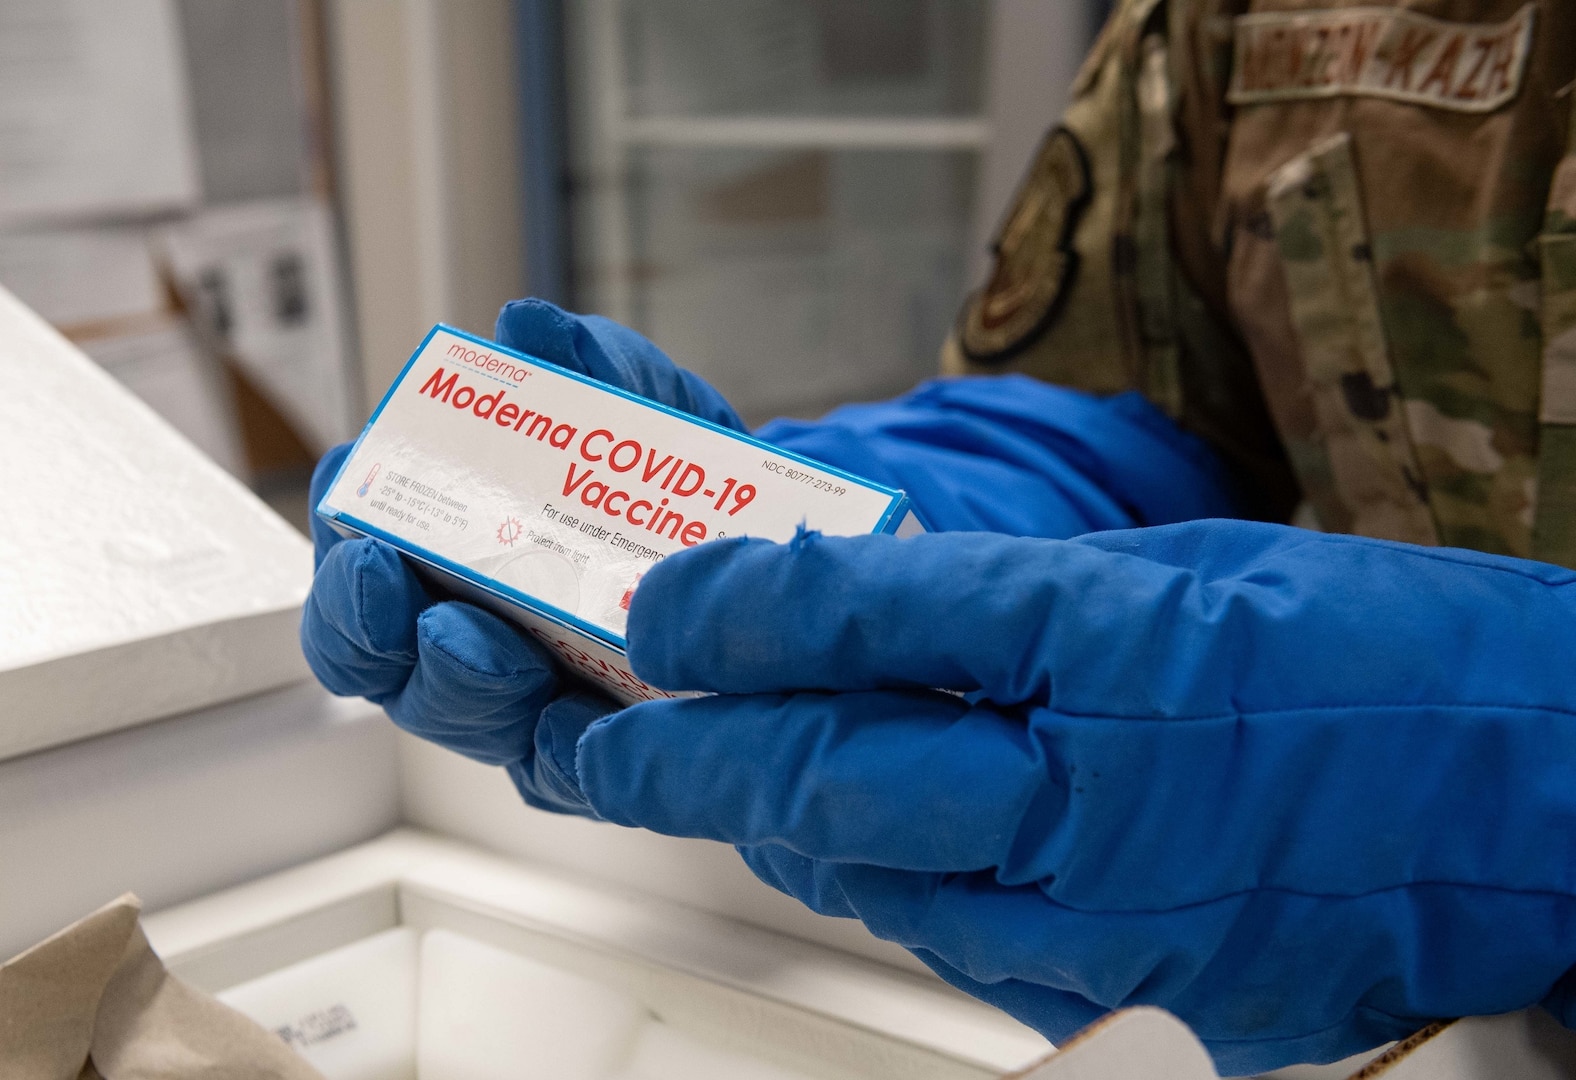 Staff Sgt. Daniel Monzon-Kazhe, 374th Medical Group non-commissioned officer in charge of contingency material, holds a box of Moderna COVID-19 vaccines at the immunization’s office on Yokota Air Base, Japan, Dec. 26, 2020. Though vaccination has begun, DoD personnel will continue to wear appropriate masks, practice physical distancing, wash hands, and follow restriction of movement to ensure and maintain safety.